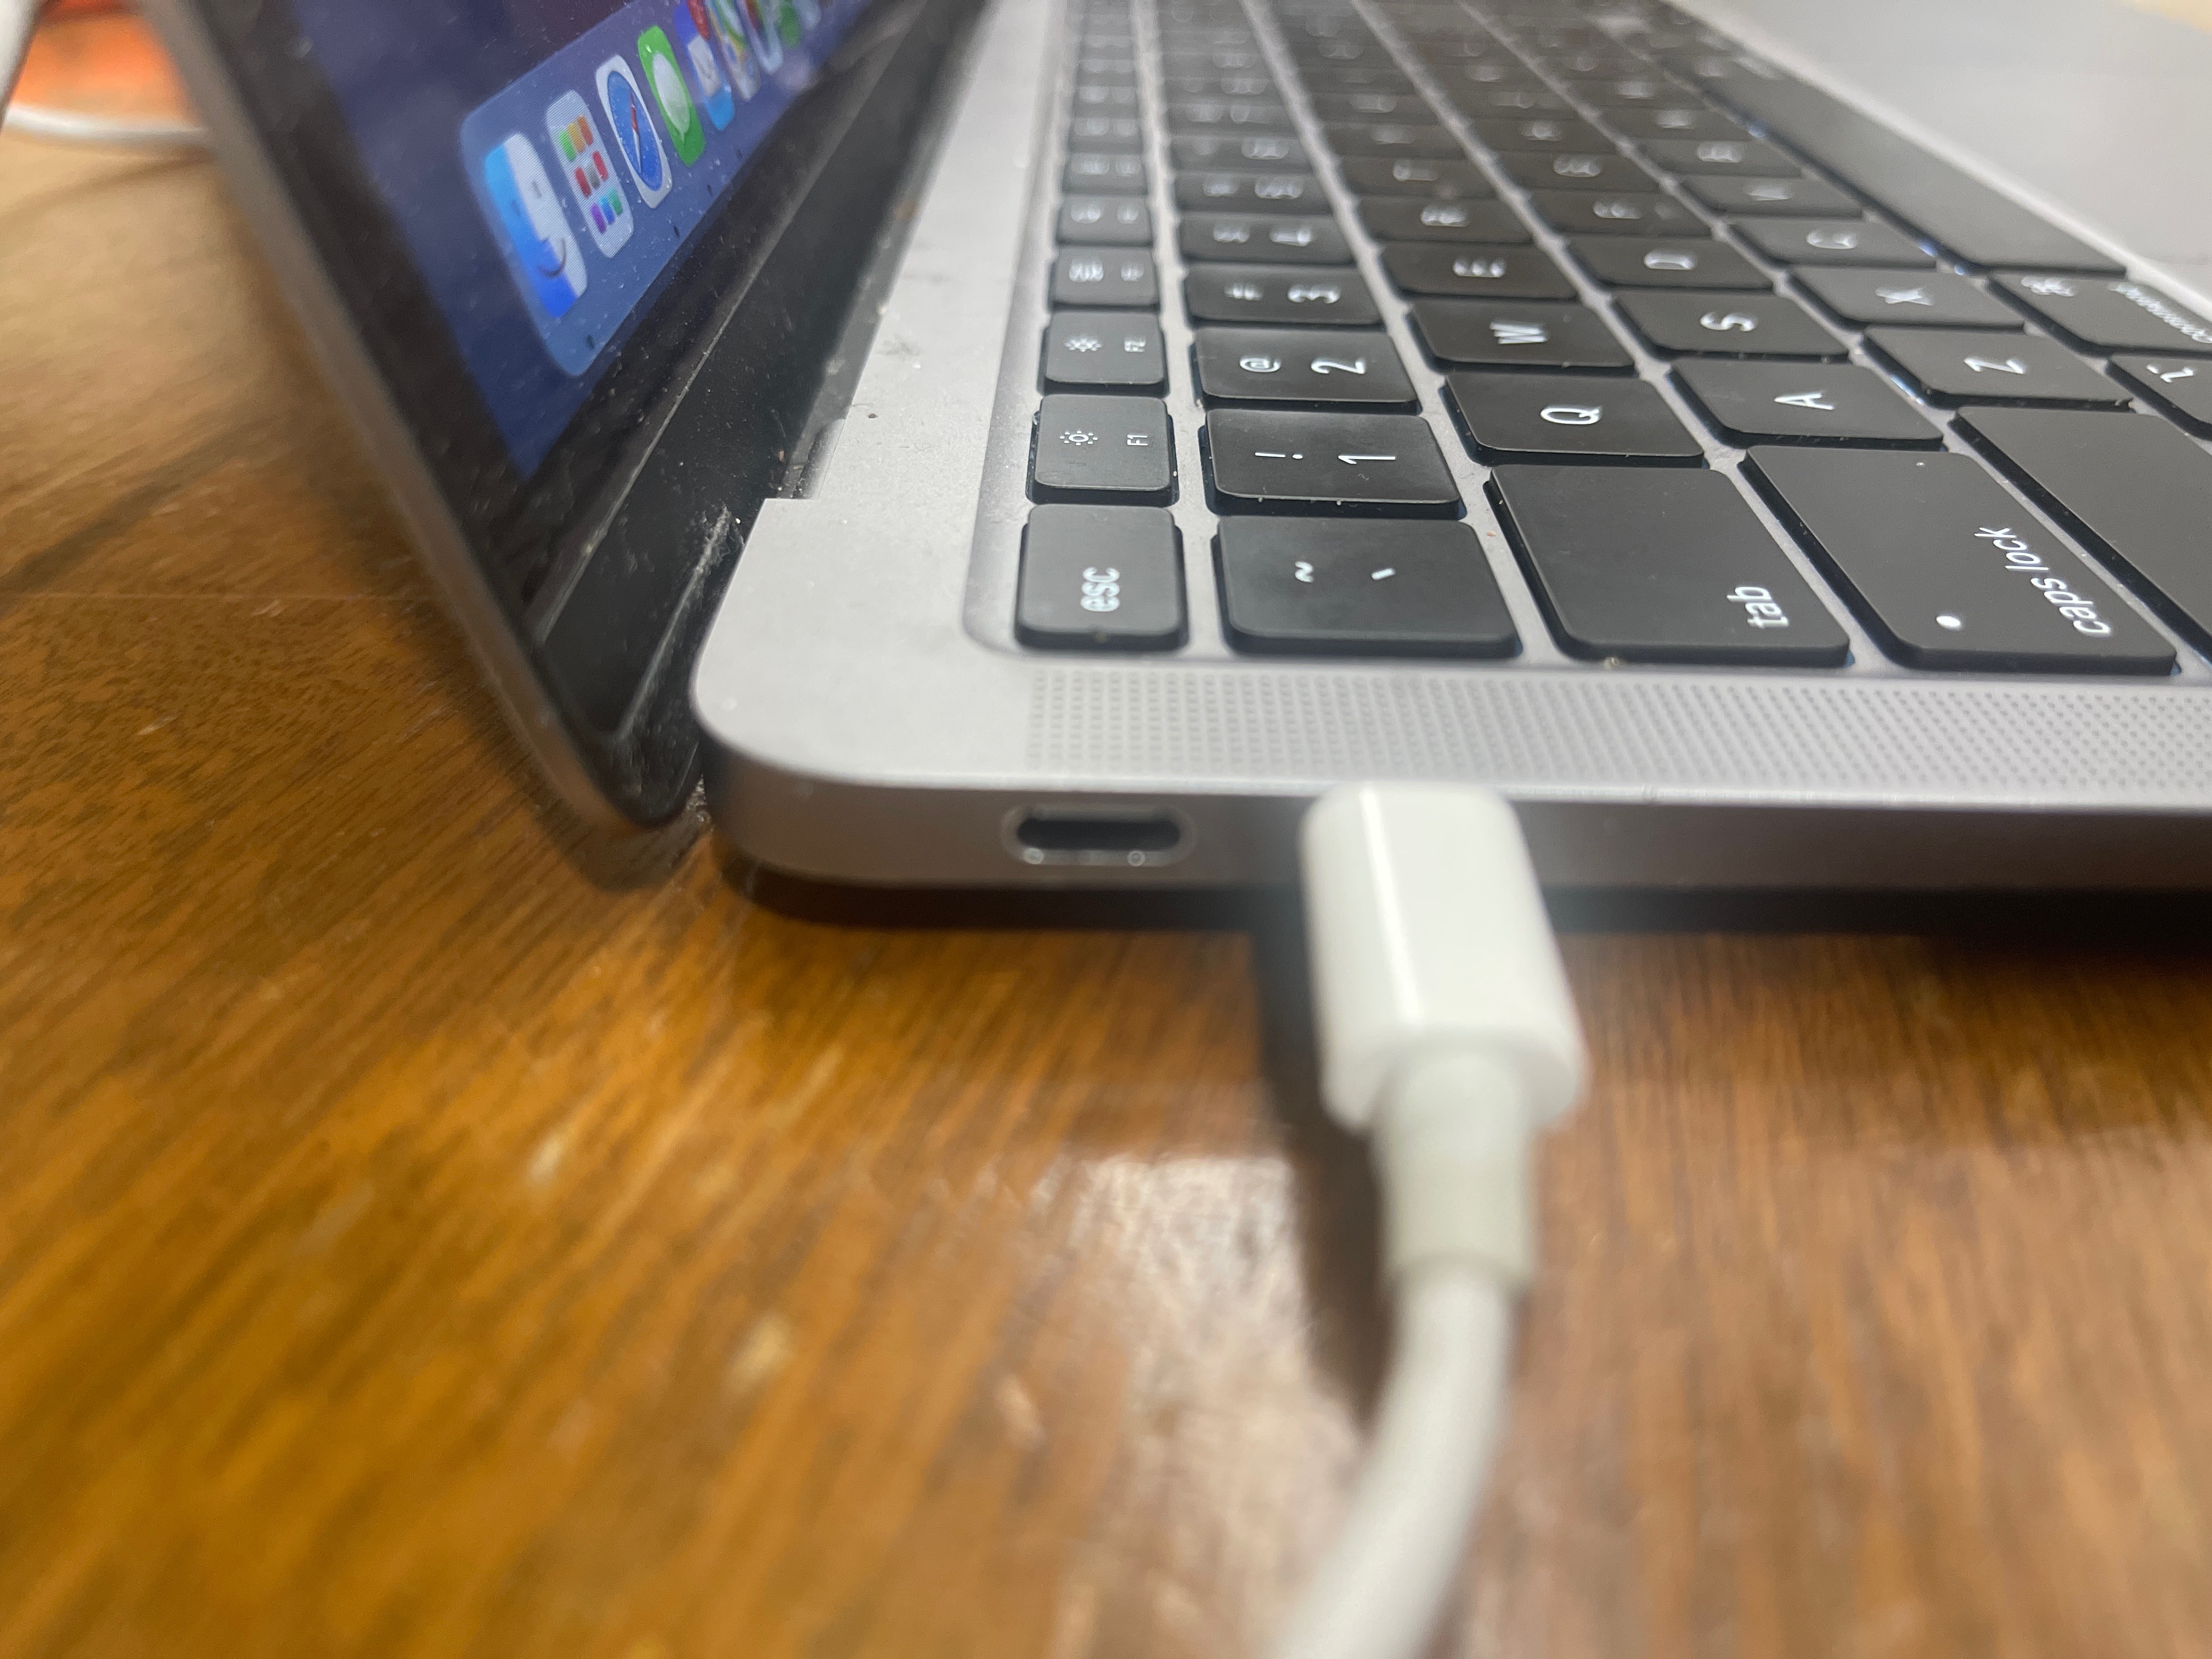 Tests show Thunderbolt ports on M1 Macs don't fully support USB